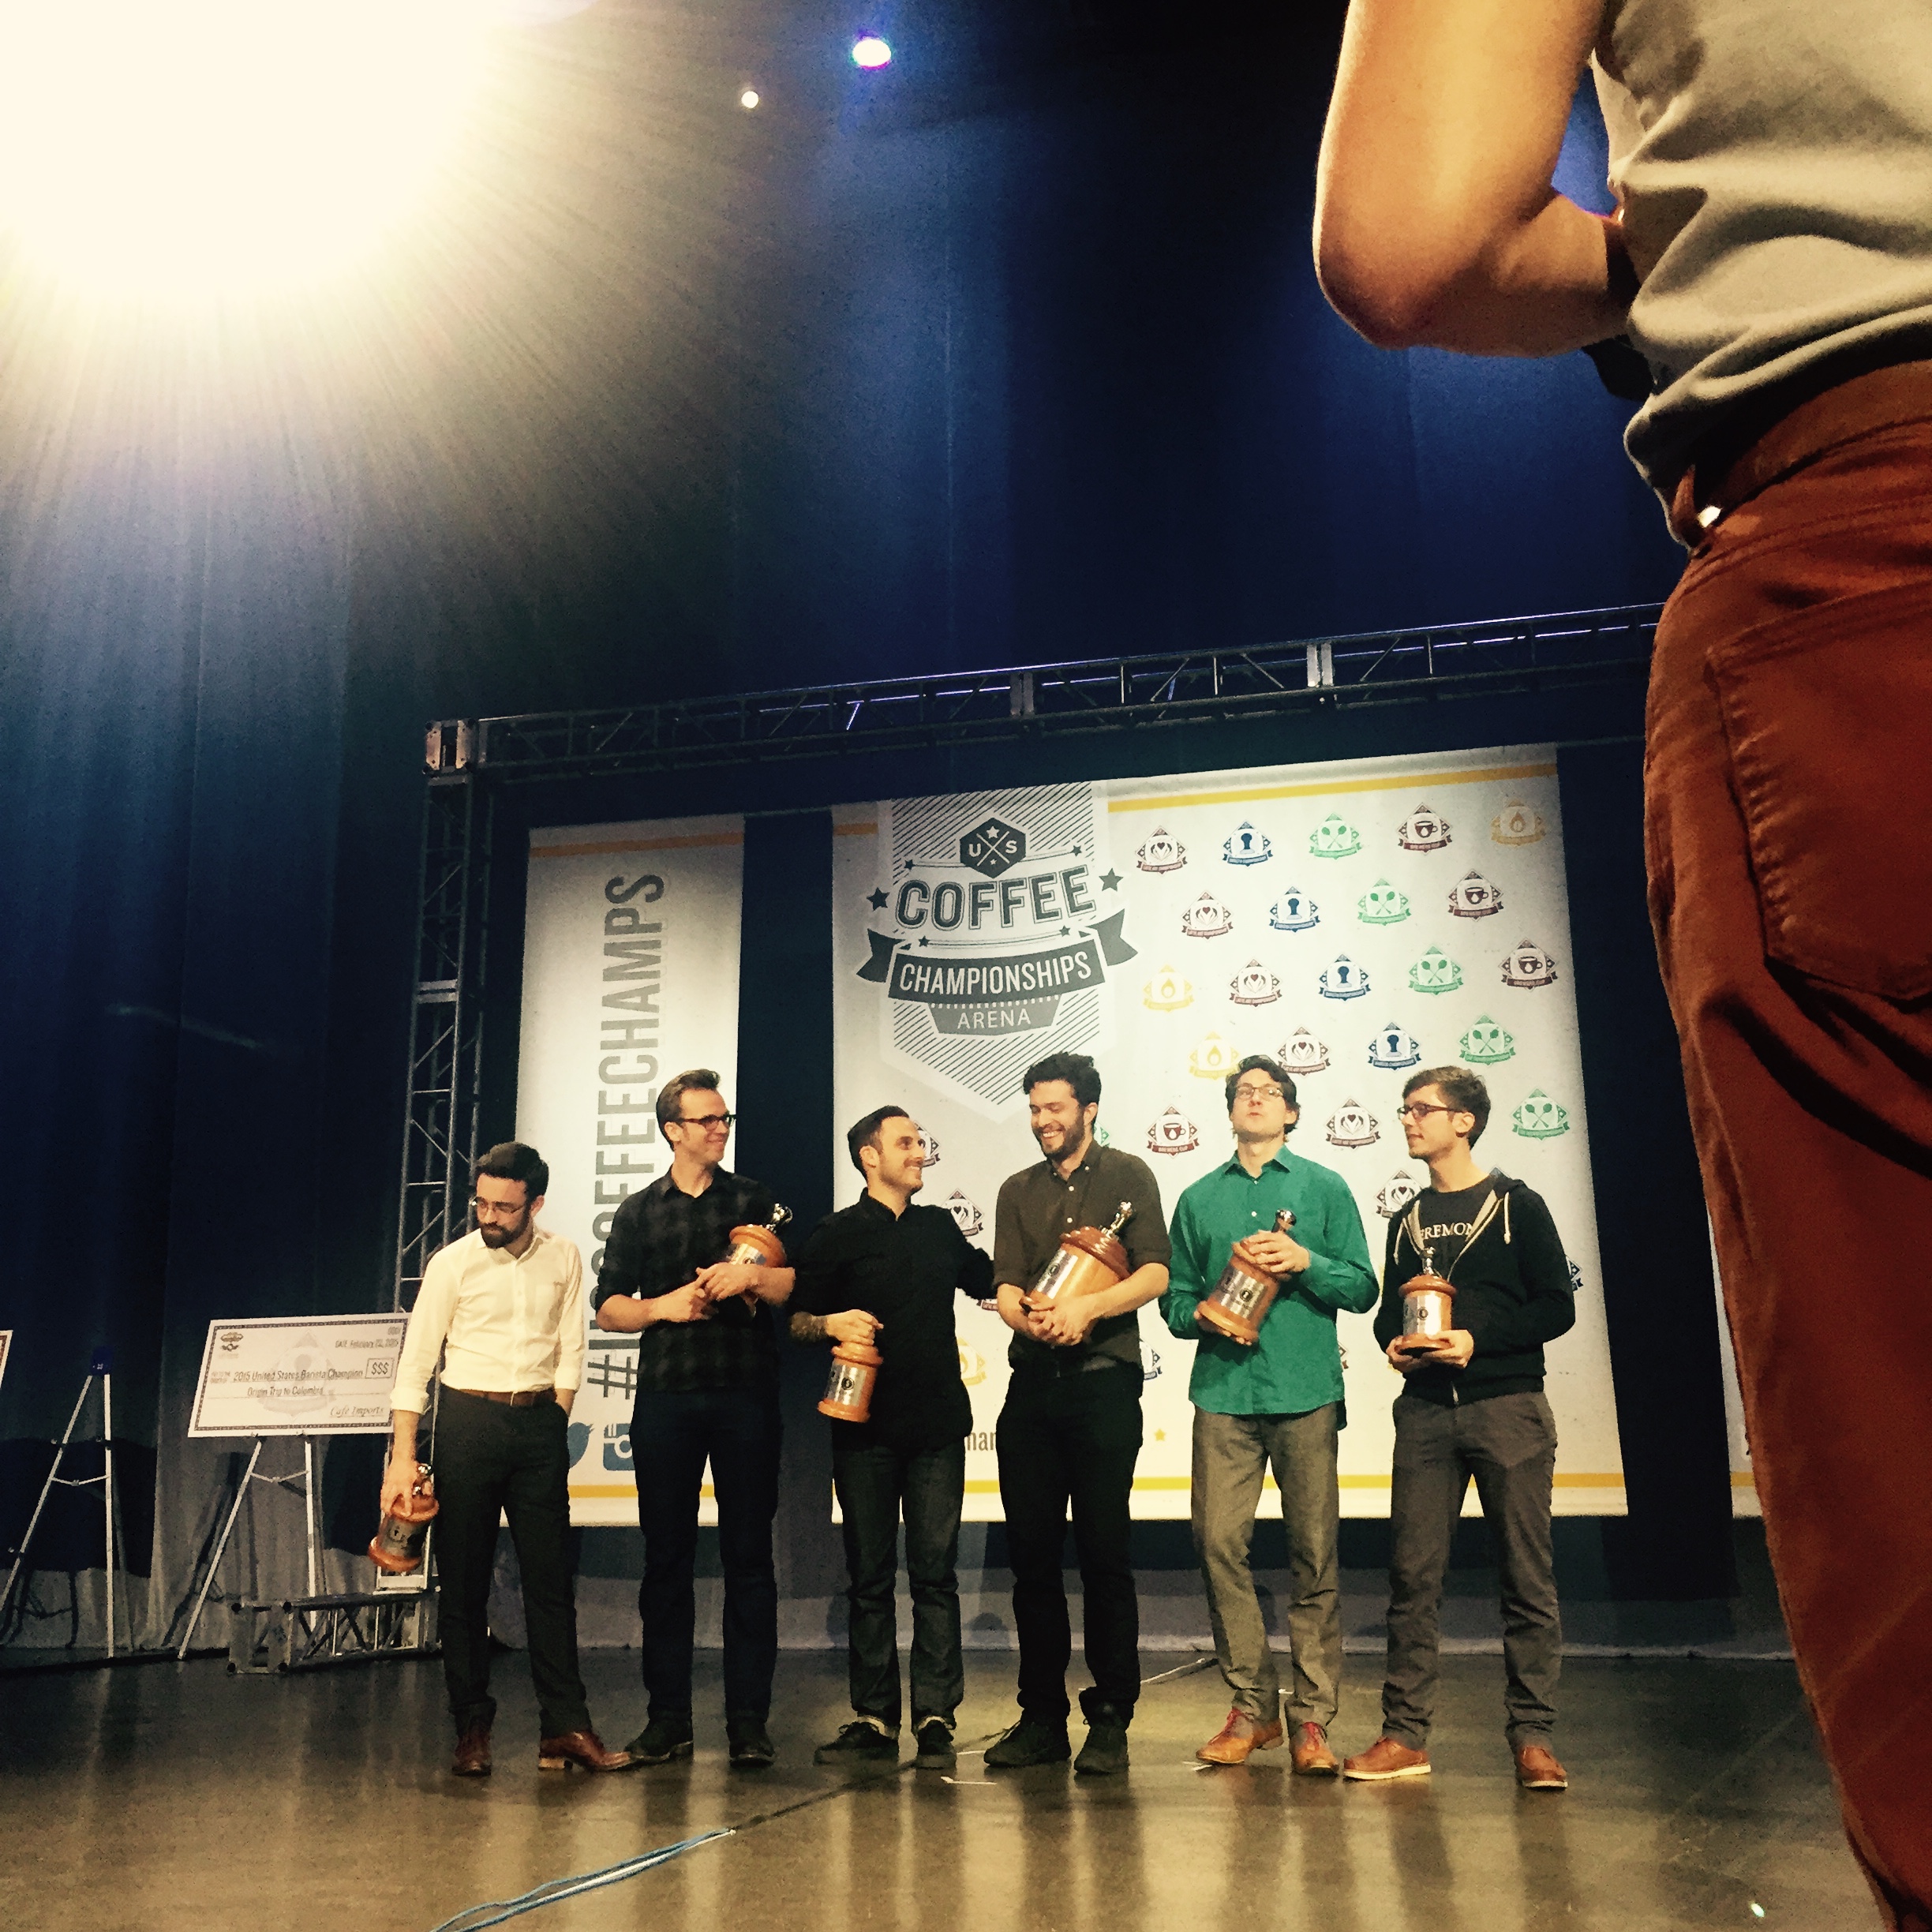 PHOTO: Charles Babinski took home the title of America's best barista in the 2015 U.S. Coffee Championships.